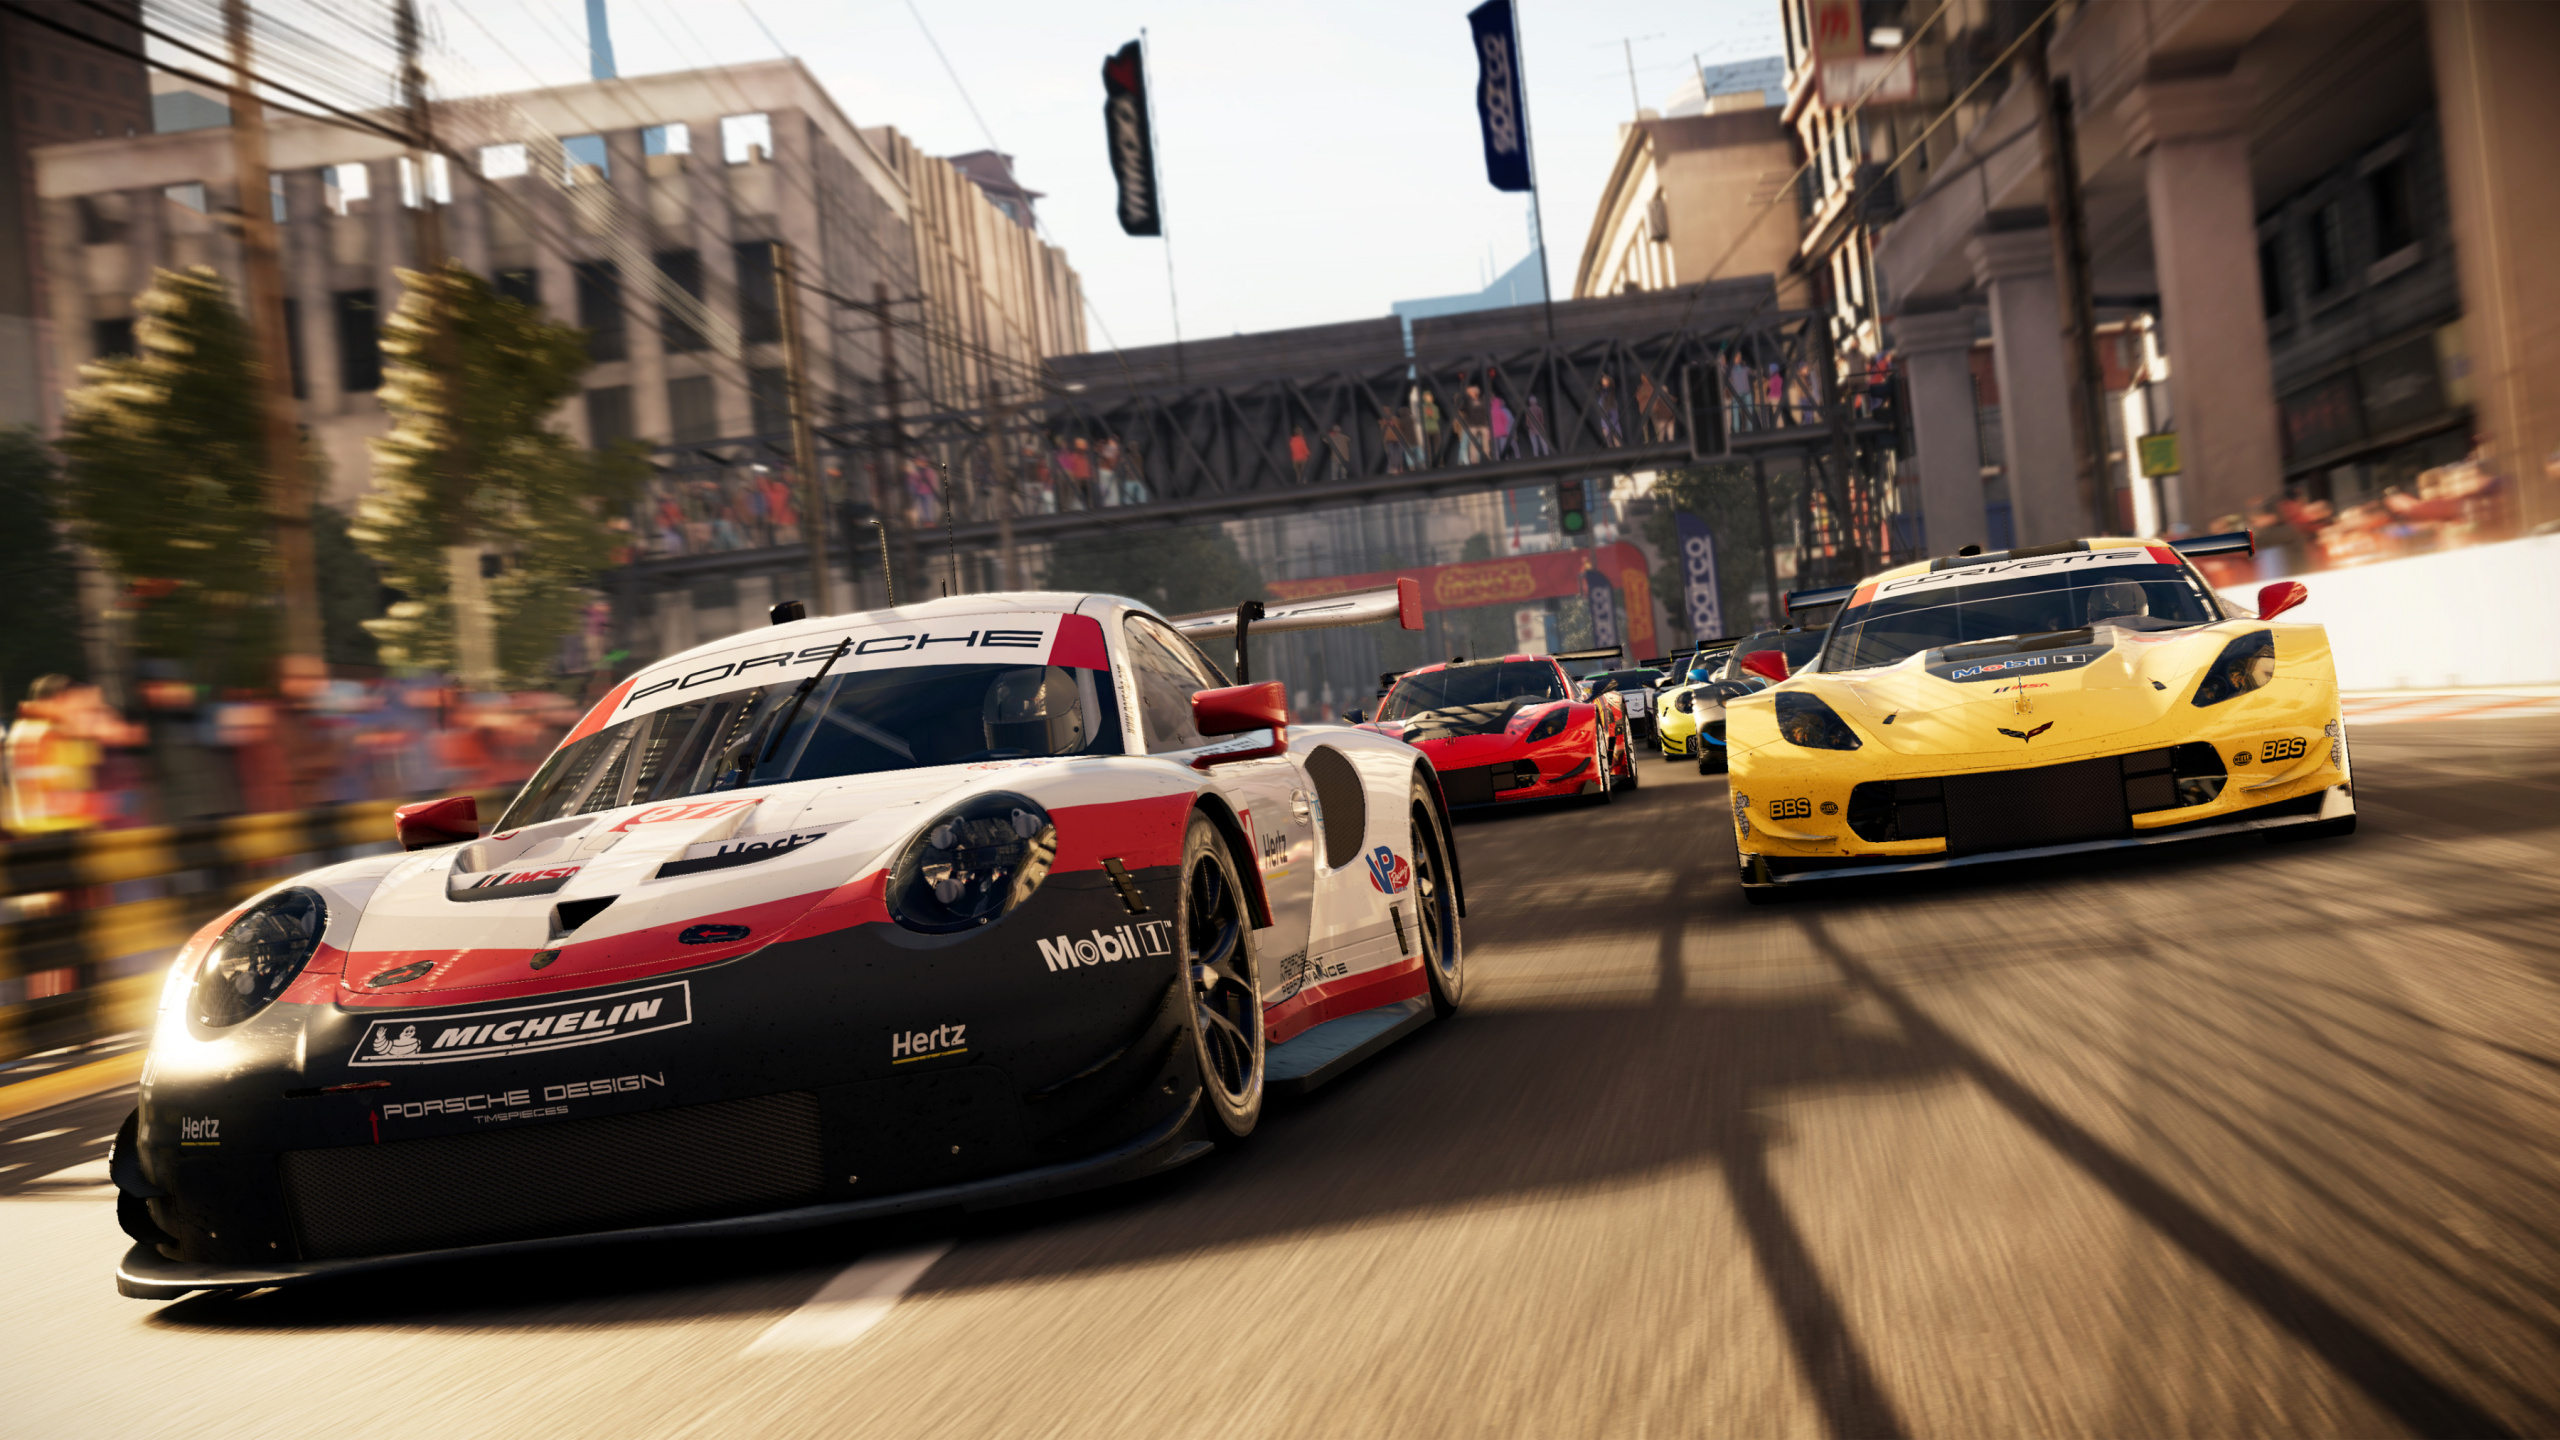 Grid, Codemasters, Playstation 4, Deportivo, Supercoche. Wallpaper in 2560x1440 Resolution